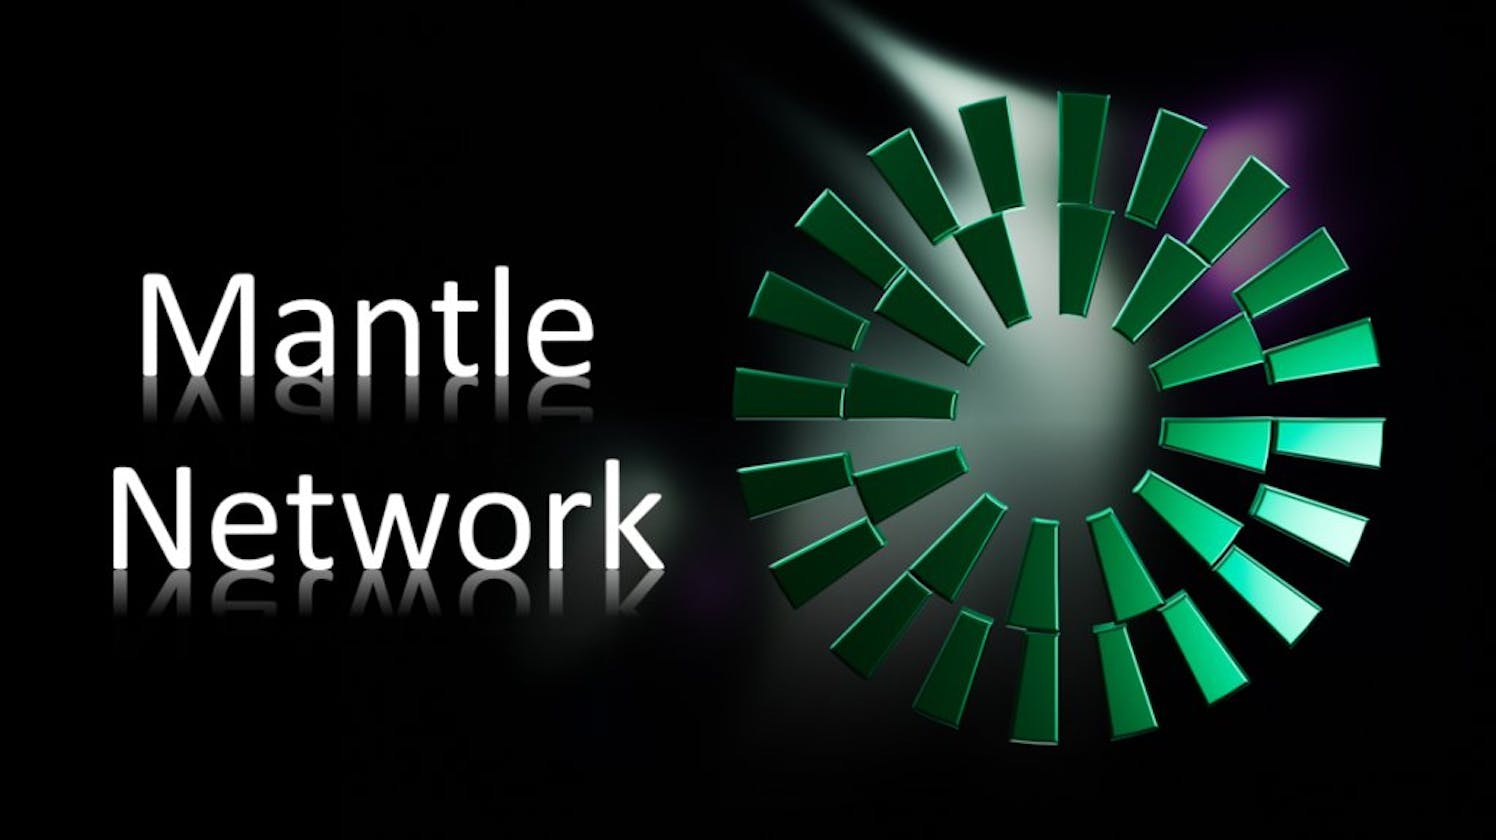 Mantle Network: Super-Scalability for Faster, Secure, and Low-Cost Ethereum Transactions